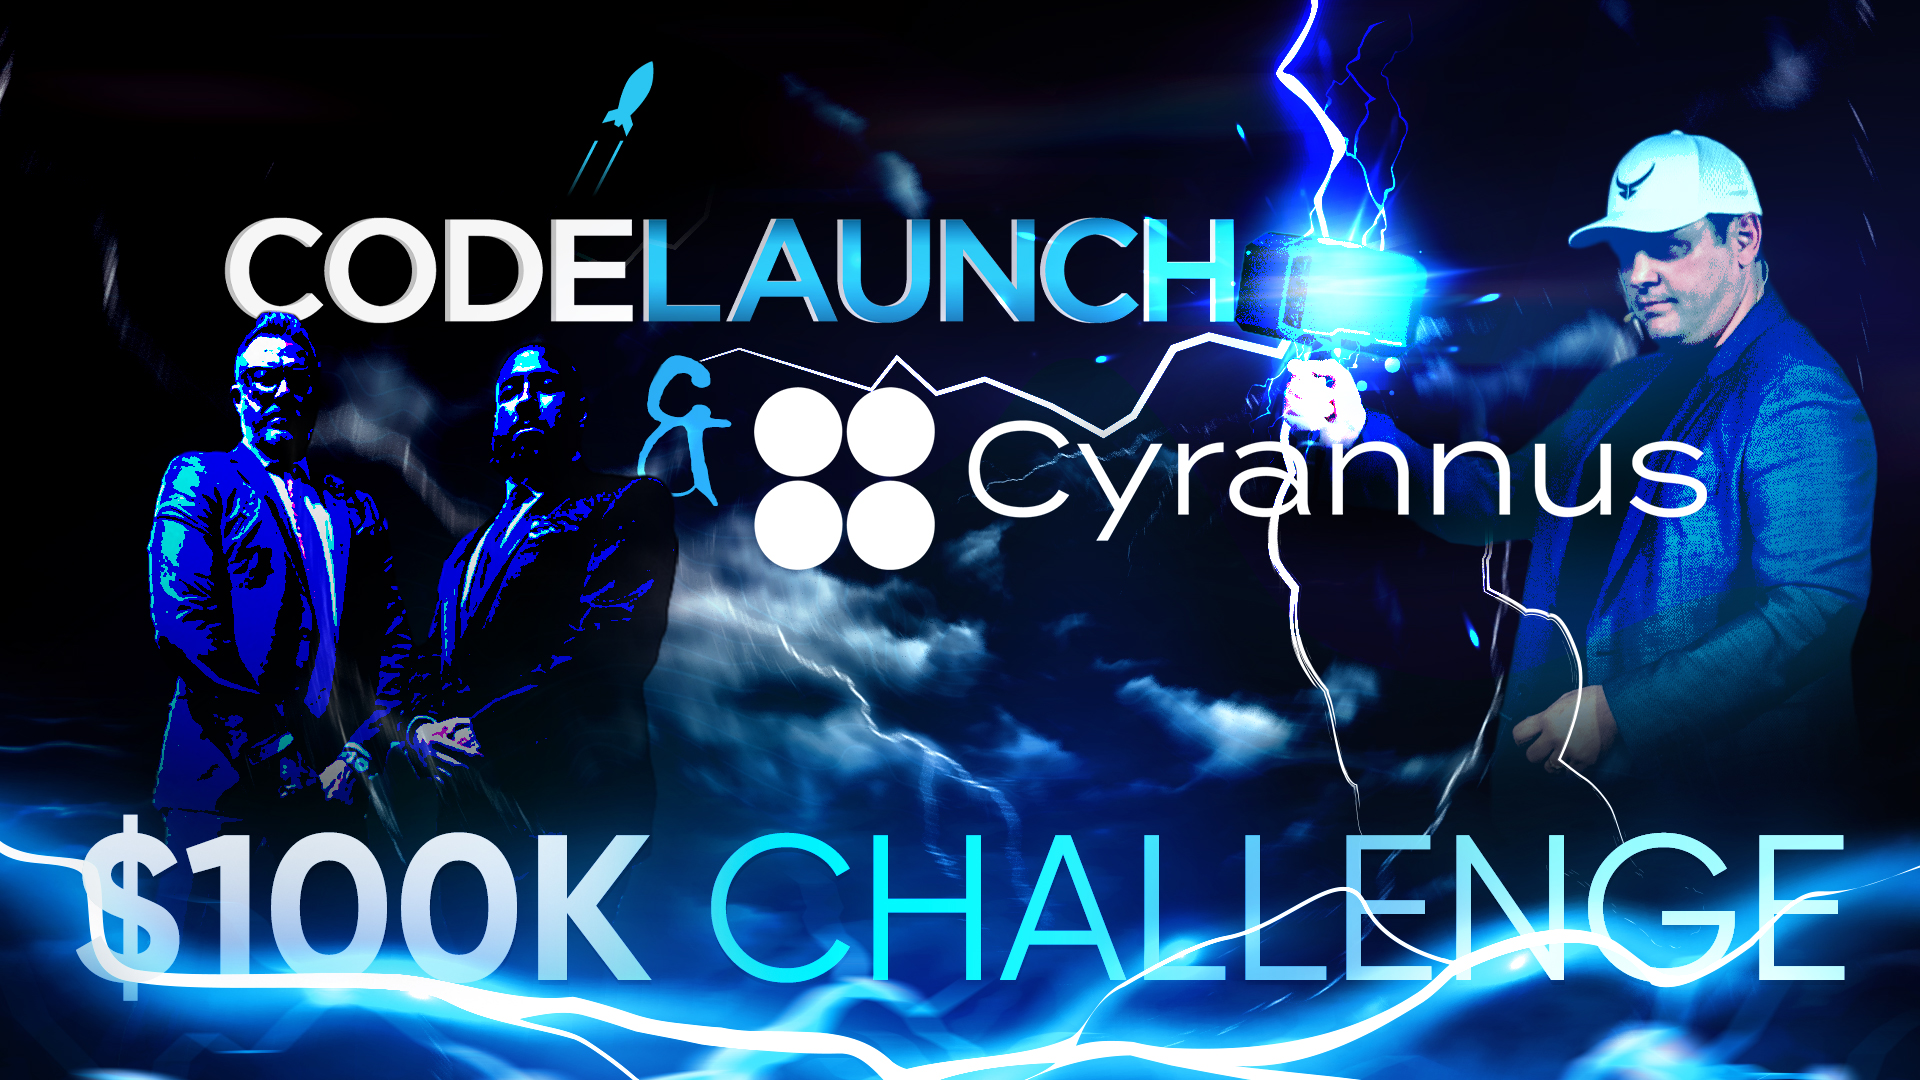 Cyrannus Pledges $100,000+ to a Future CodeLaunch Startup! Could You Be a Winner?